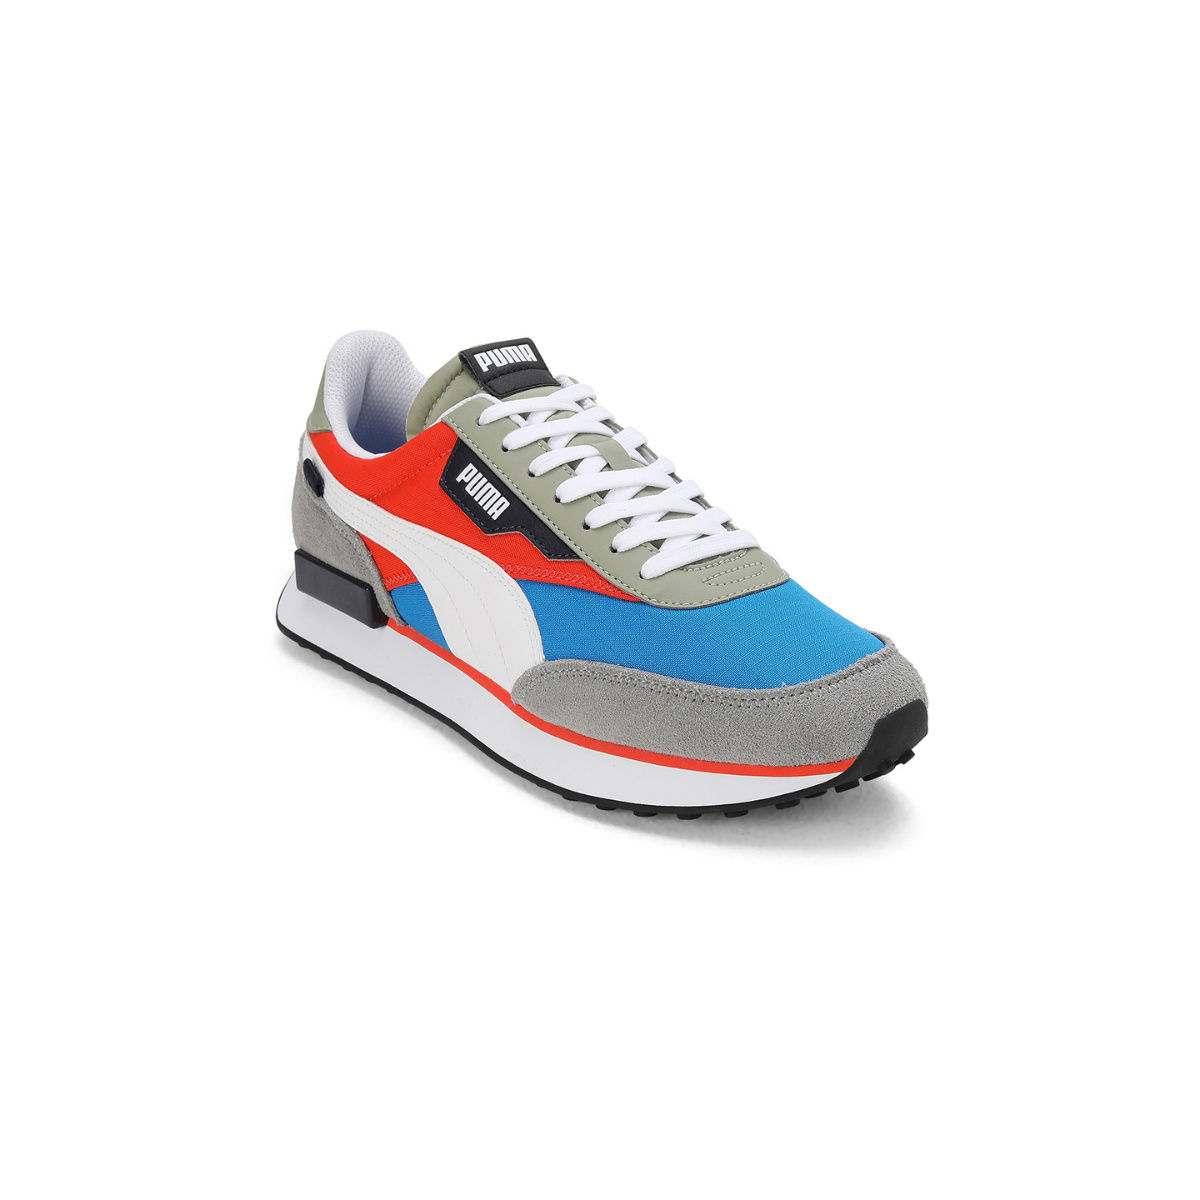 PUMA x NEED FOR SPEED RS-TRCK Sneakers | PUMA